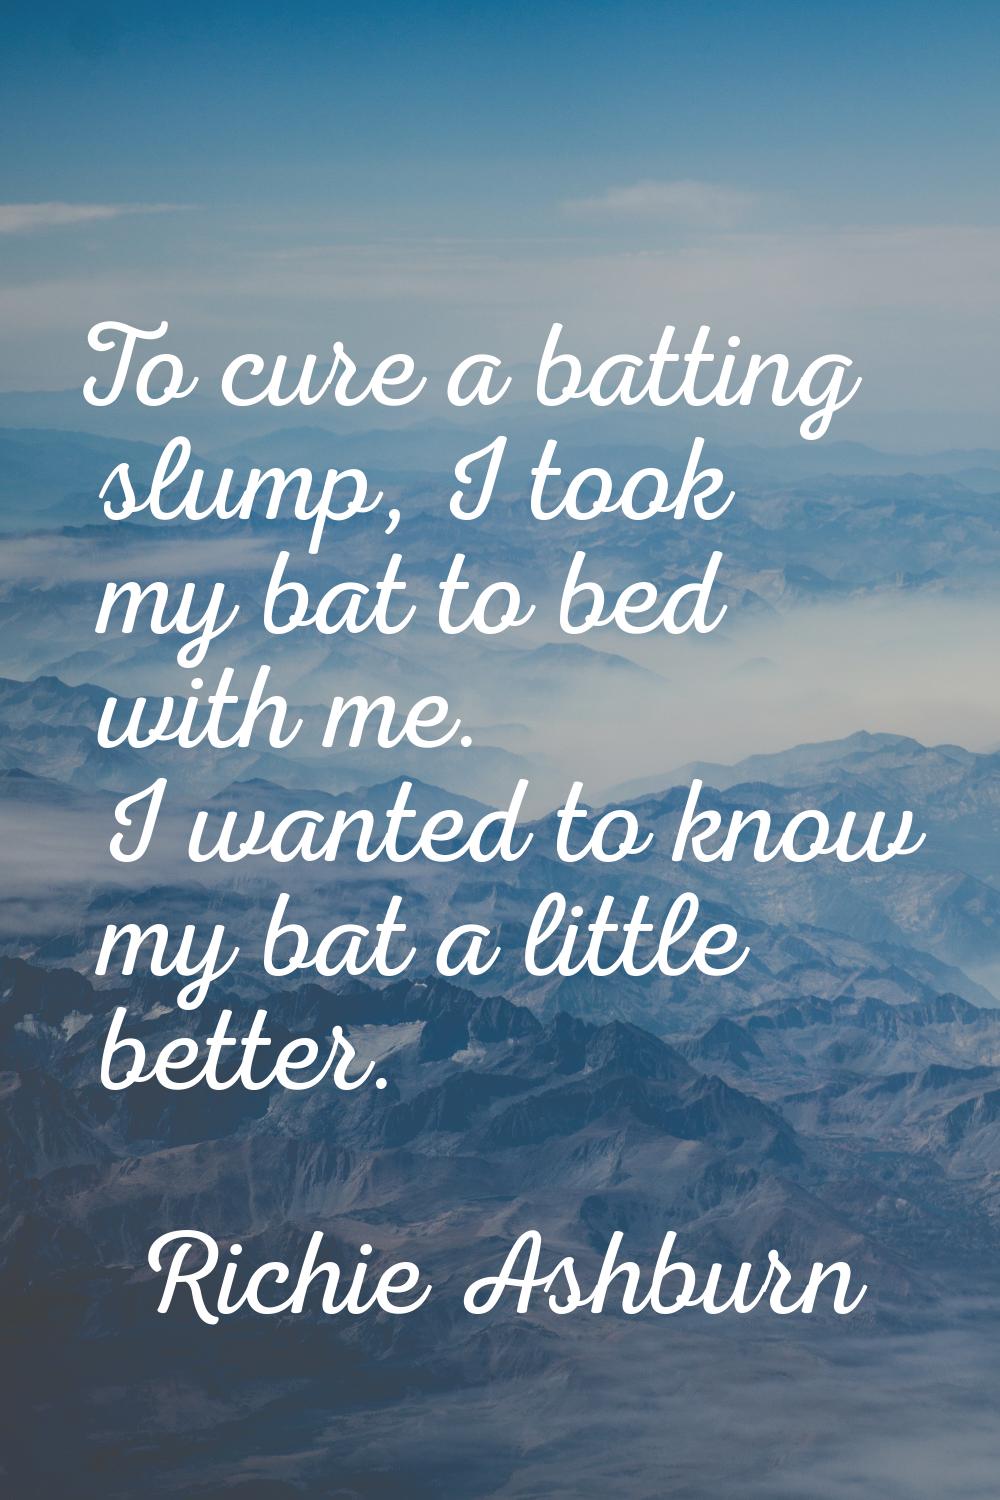 To cure a batting slump, I took my bat to bed with me. I wanted to know my bat a little better.